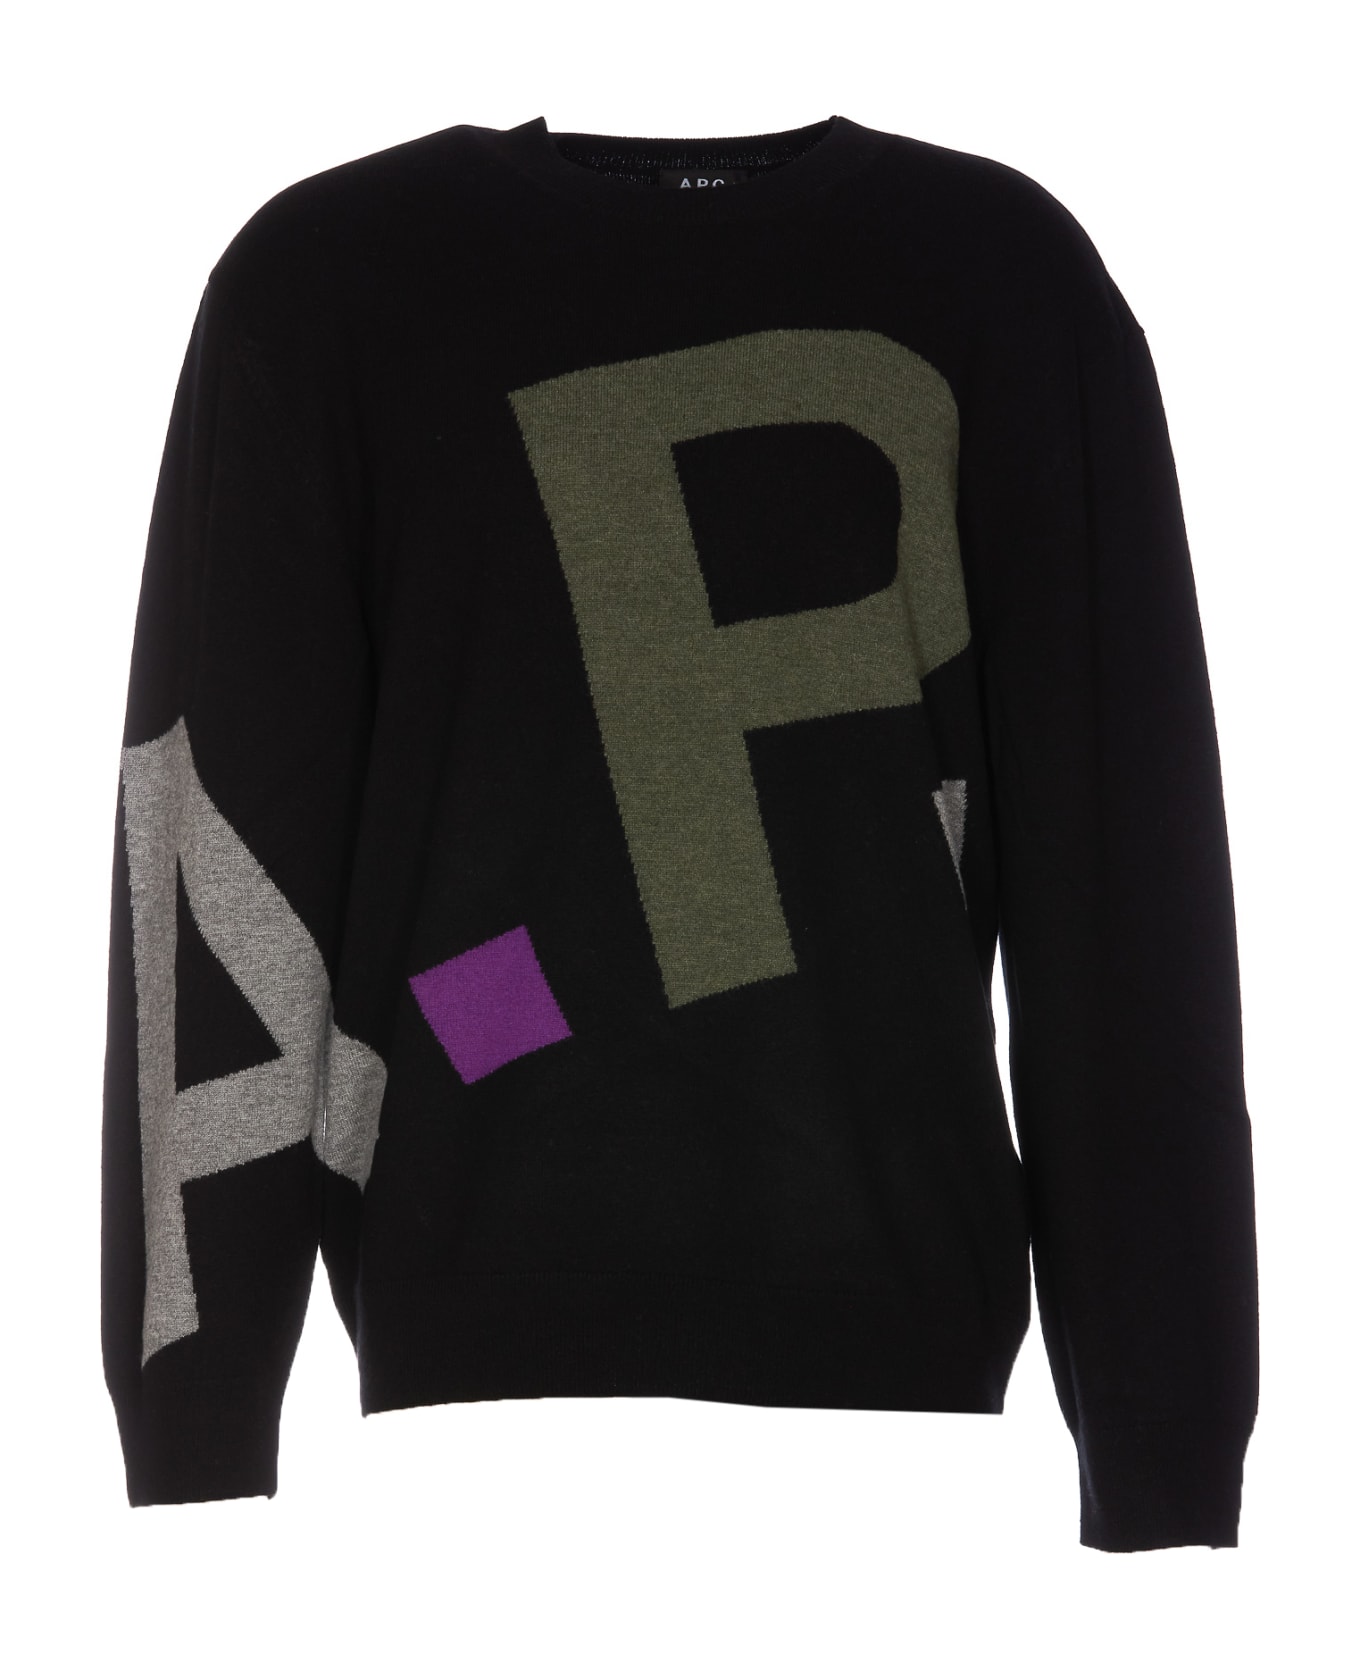 A.P.C. Logo All Over Sweater - Lzz Black